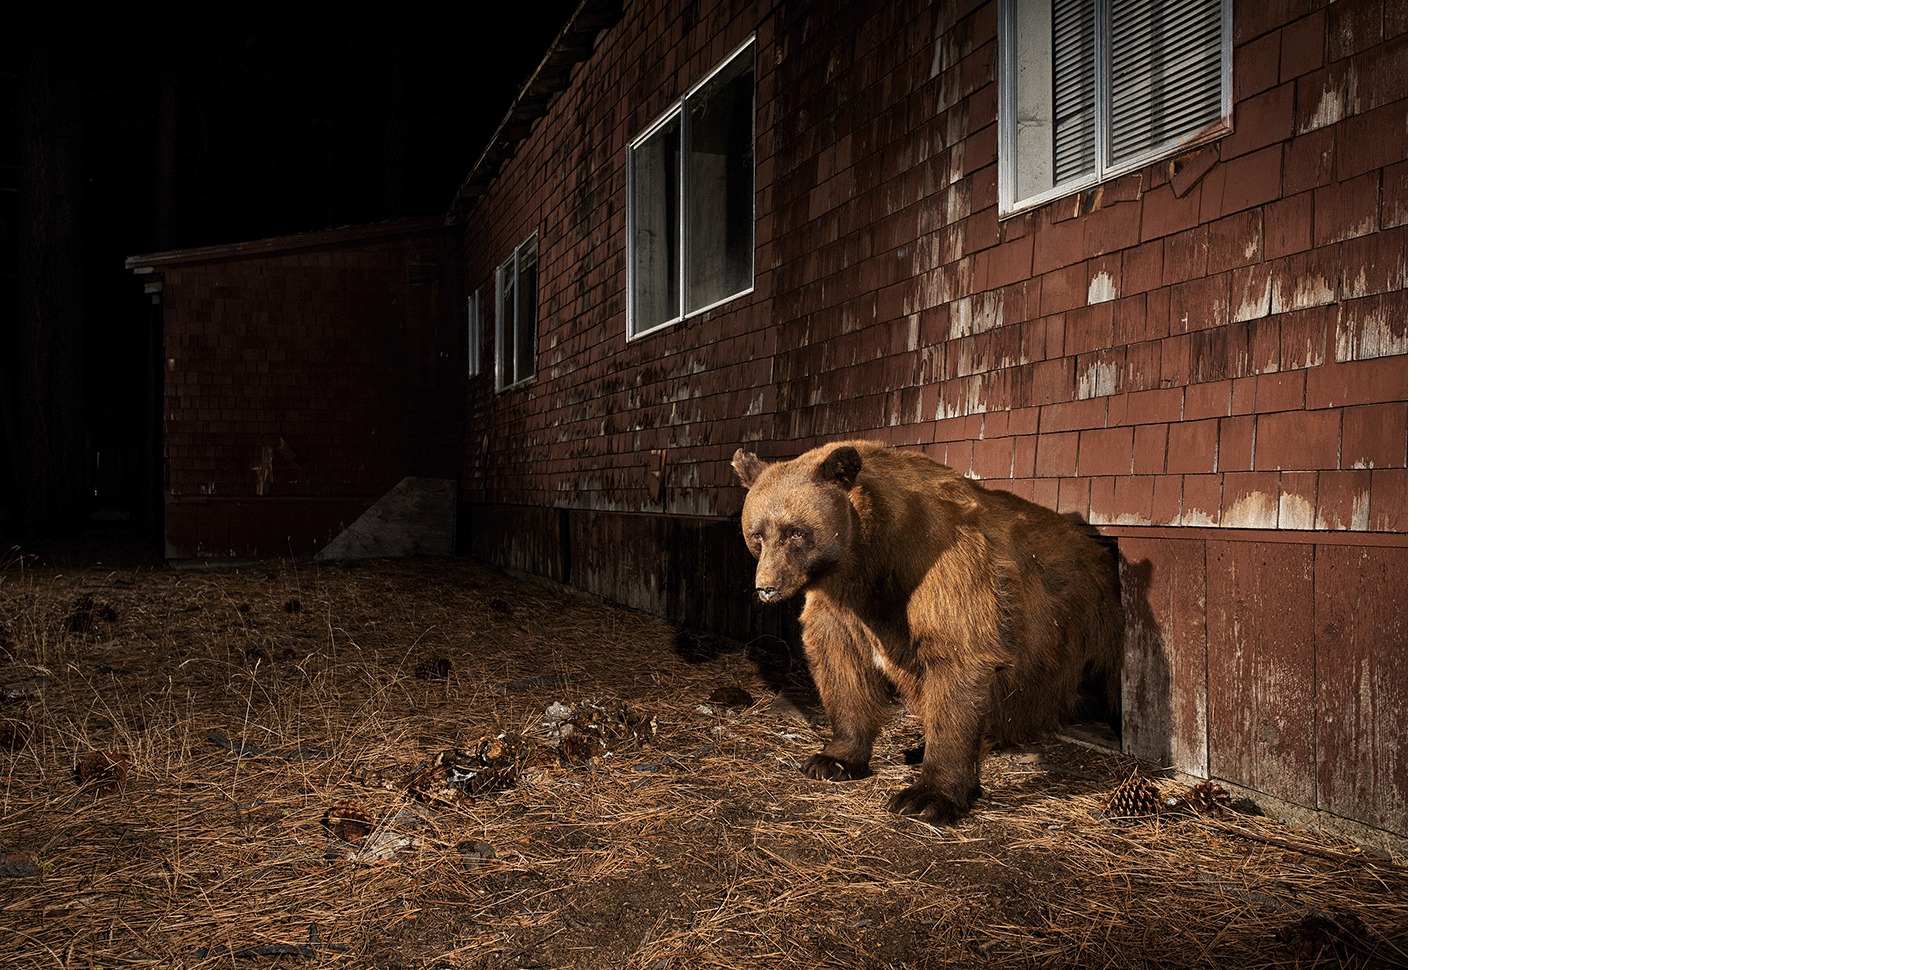 A black bear emerges from a house basement in the night in South Lake Tahoe. Photo by Corey Arnold